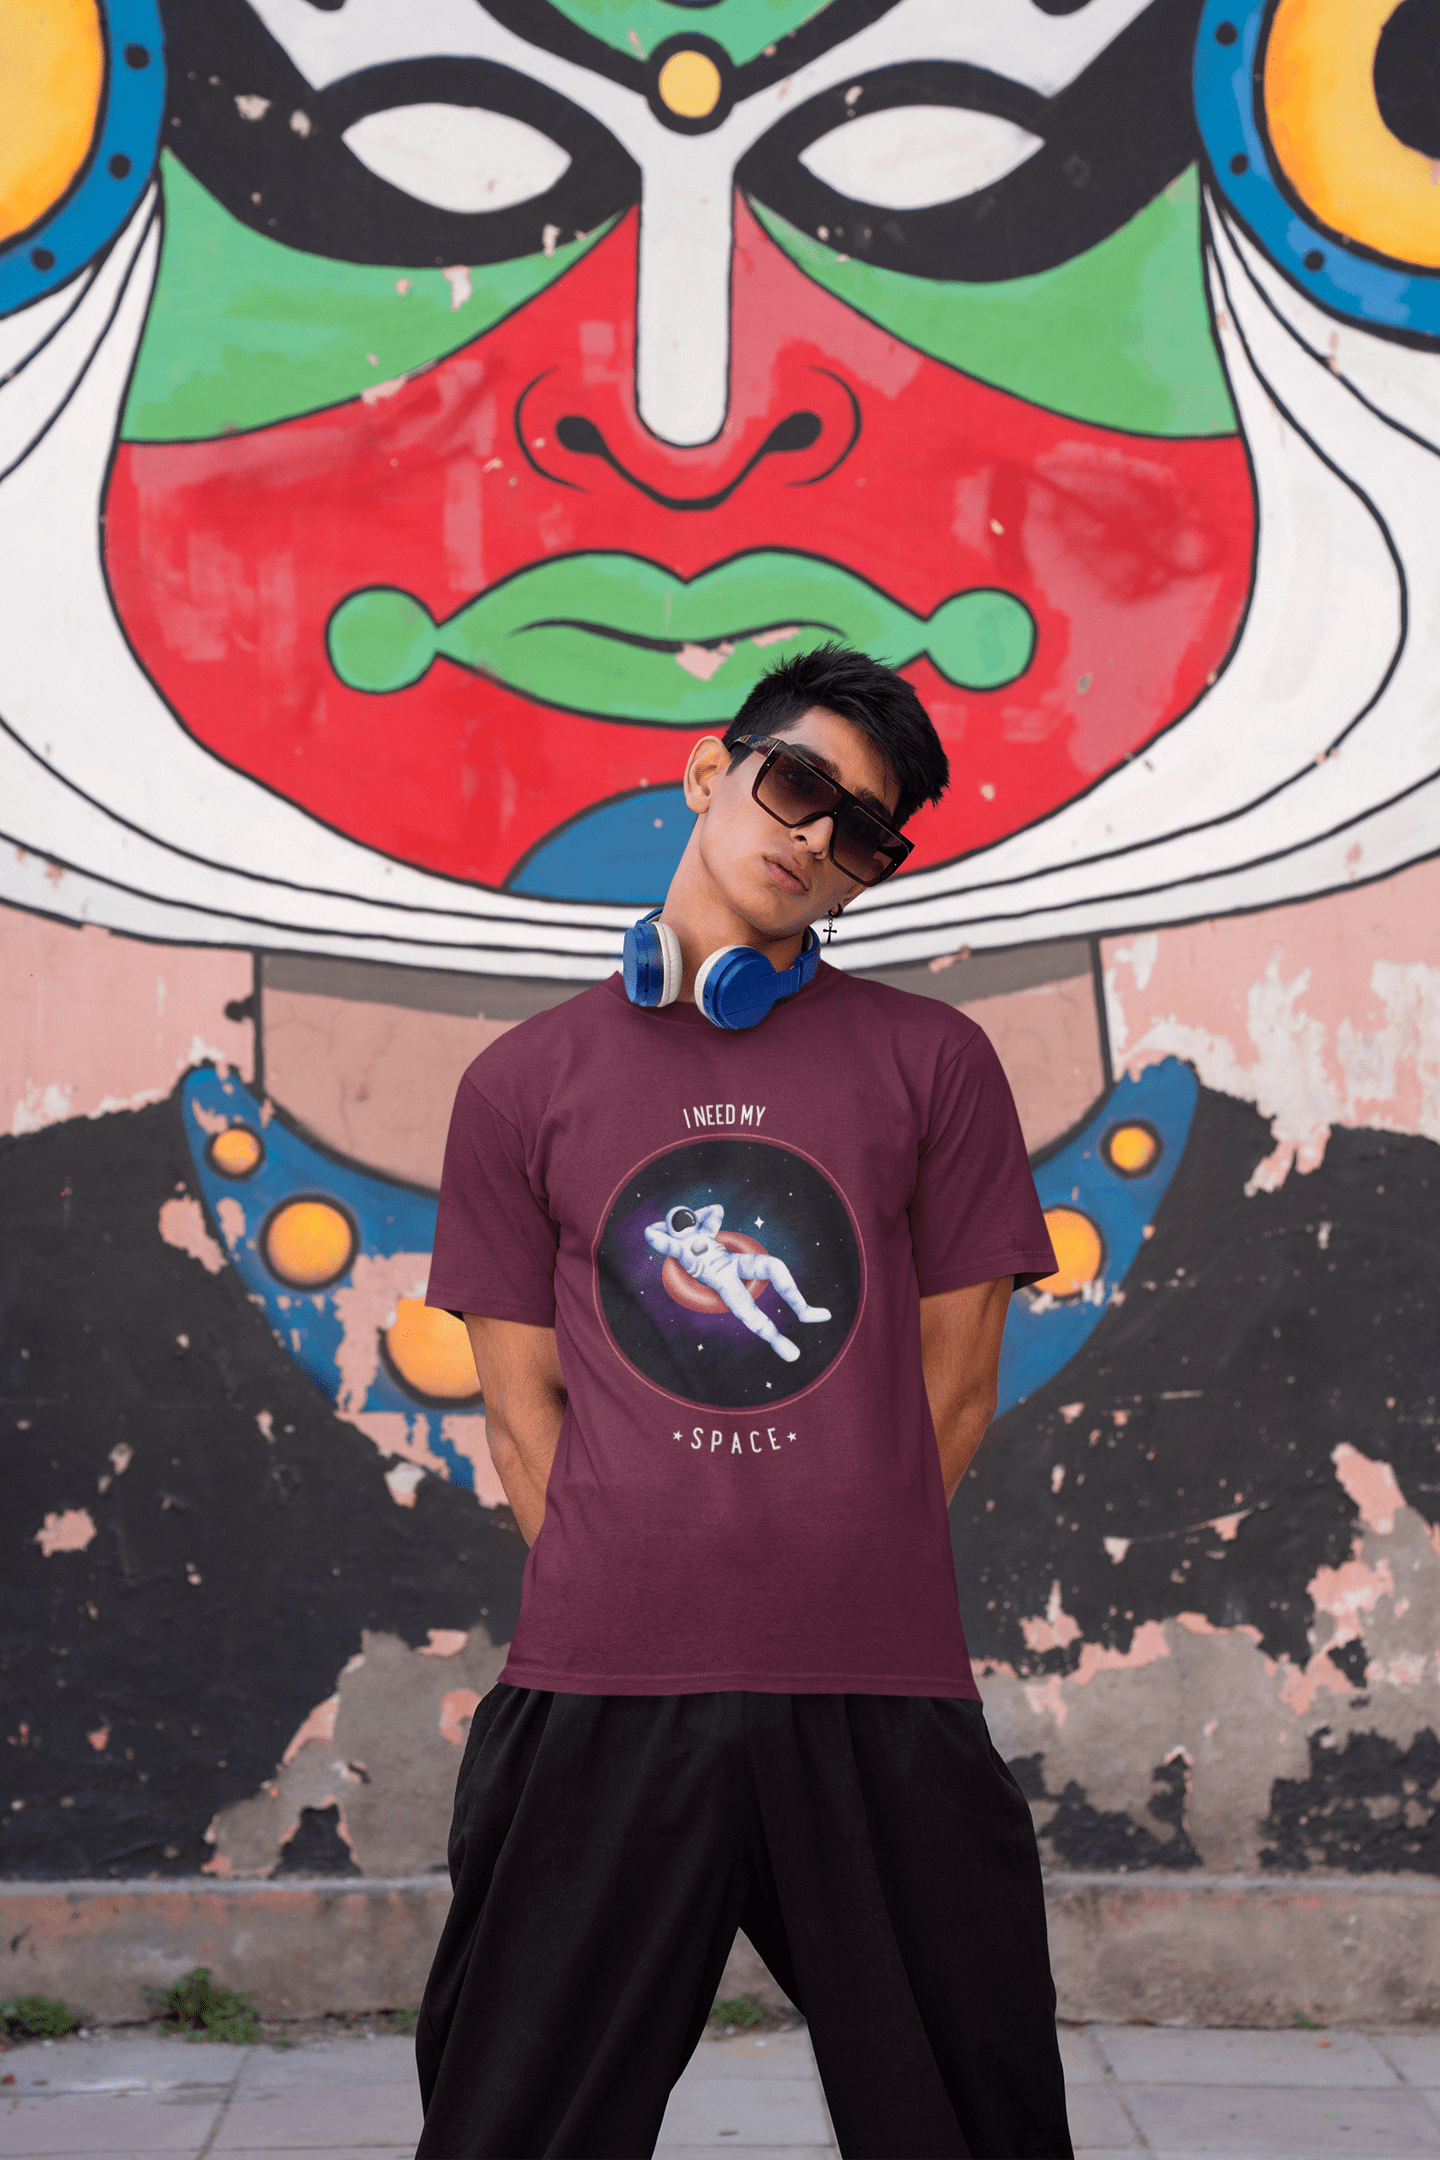 Need my space : Unisex Graphic T-shirt | Graphic Tees